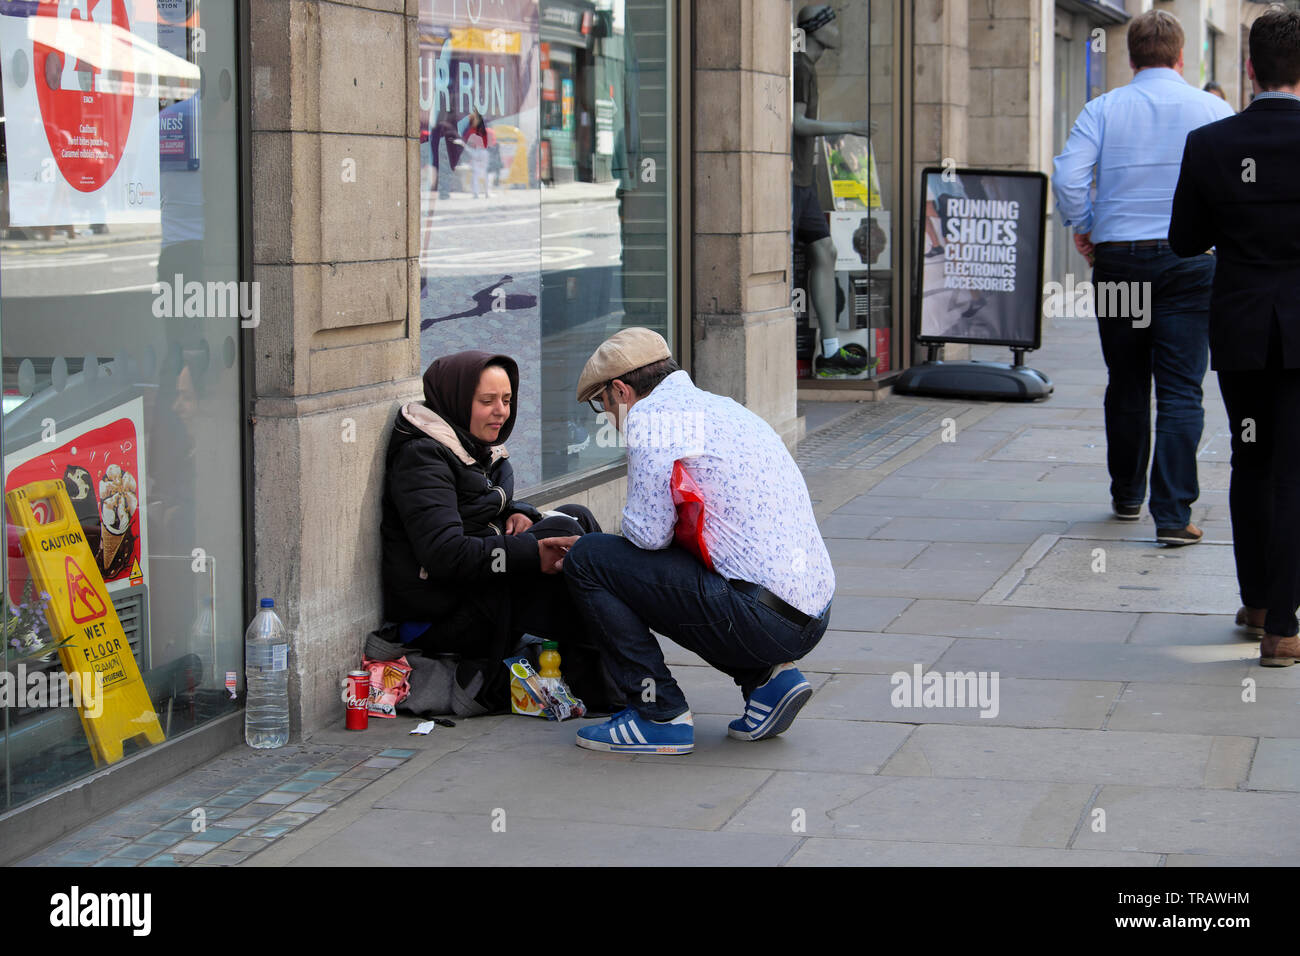 A kind man offers food and drink to a homeless woman begging on a street outside a supermarket with people walking by London England UK  KATHY DEWITT Stock Photo